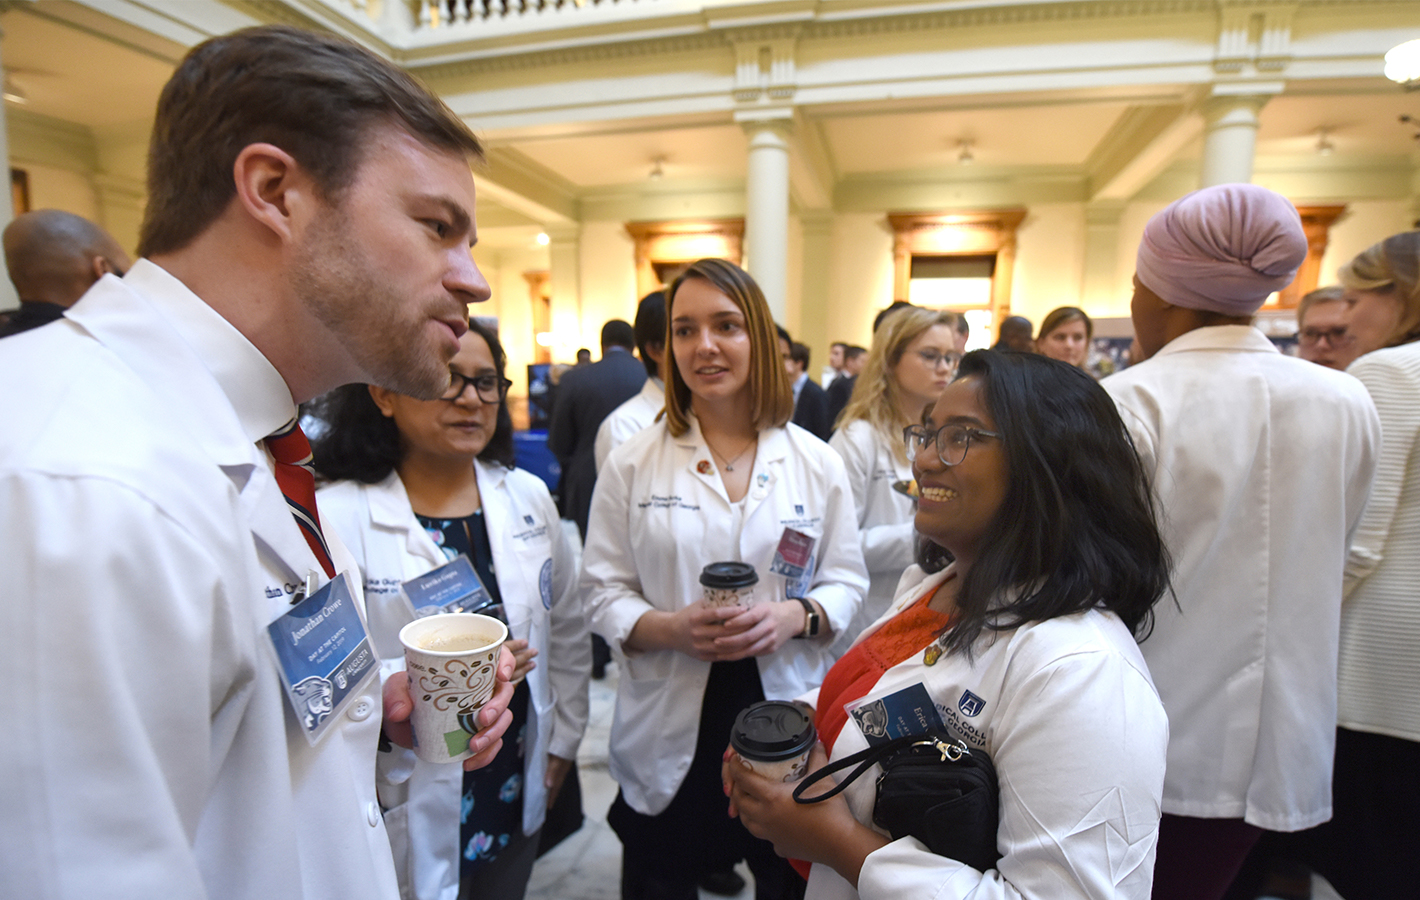 AU students chatting in the Georgia state capitol